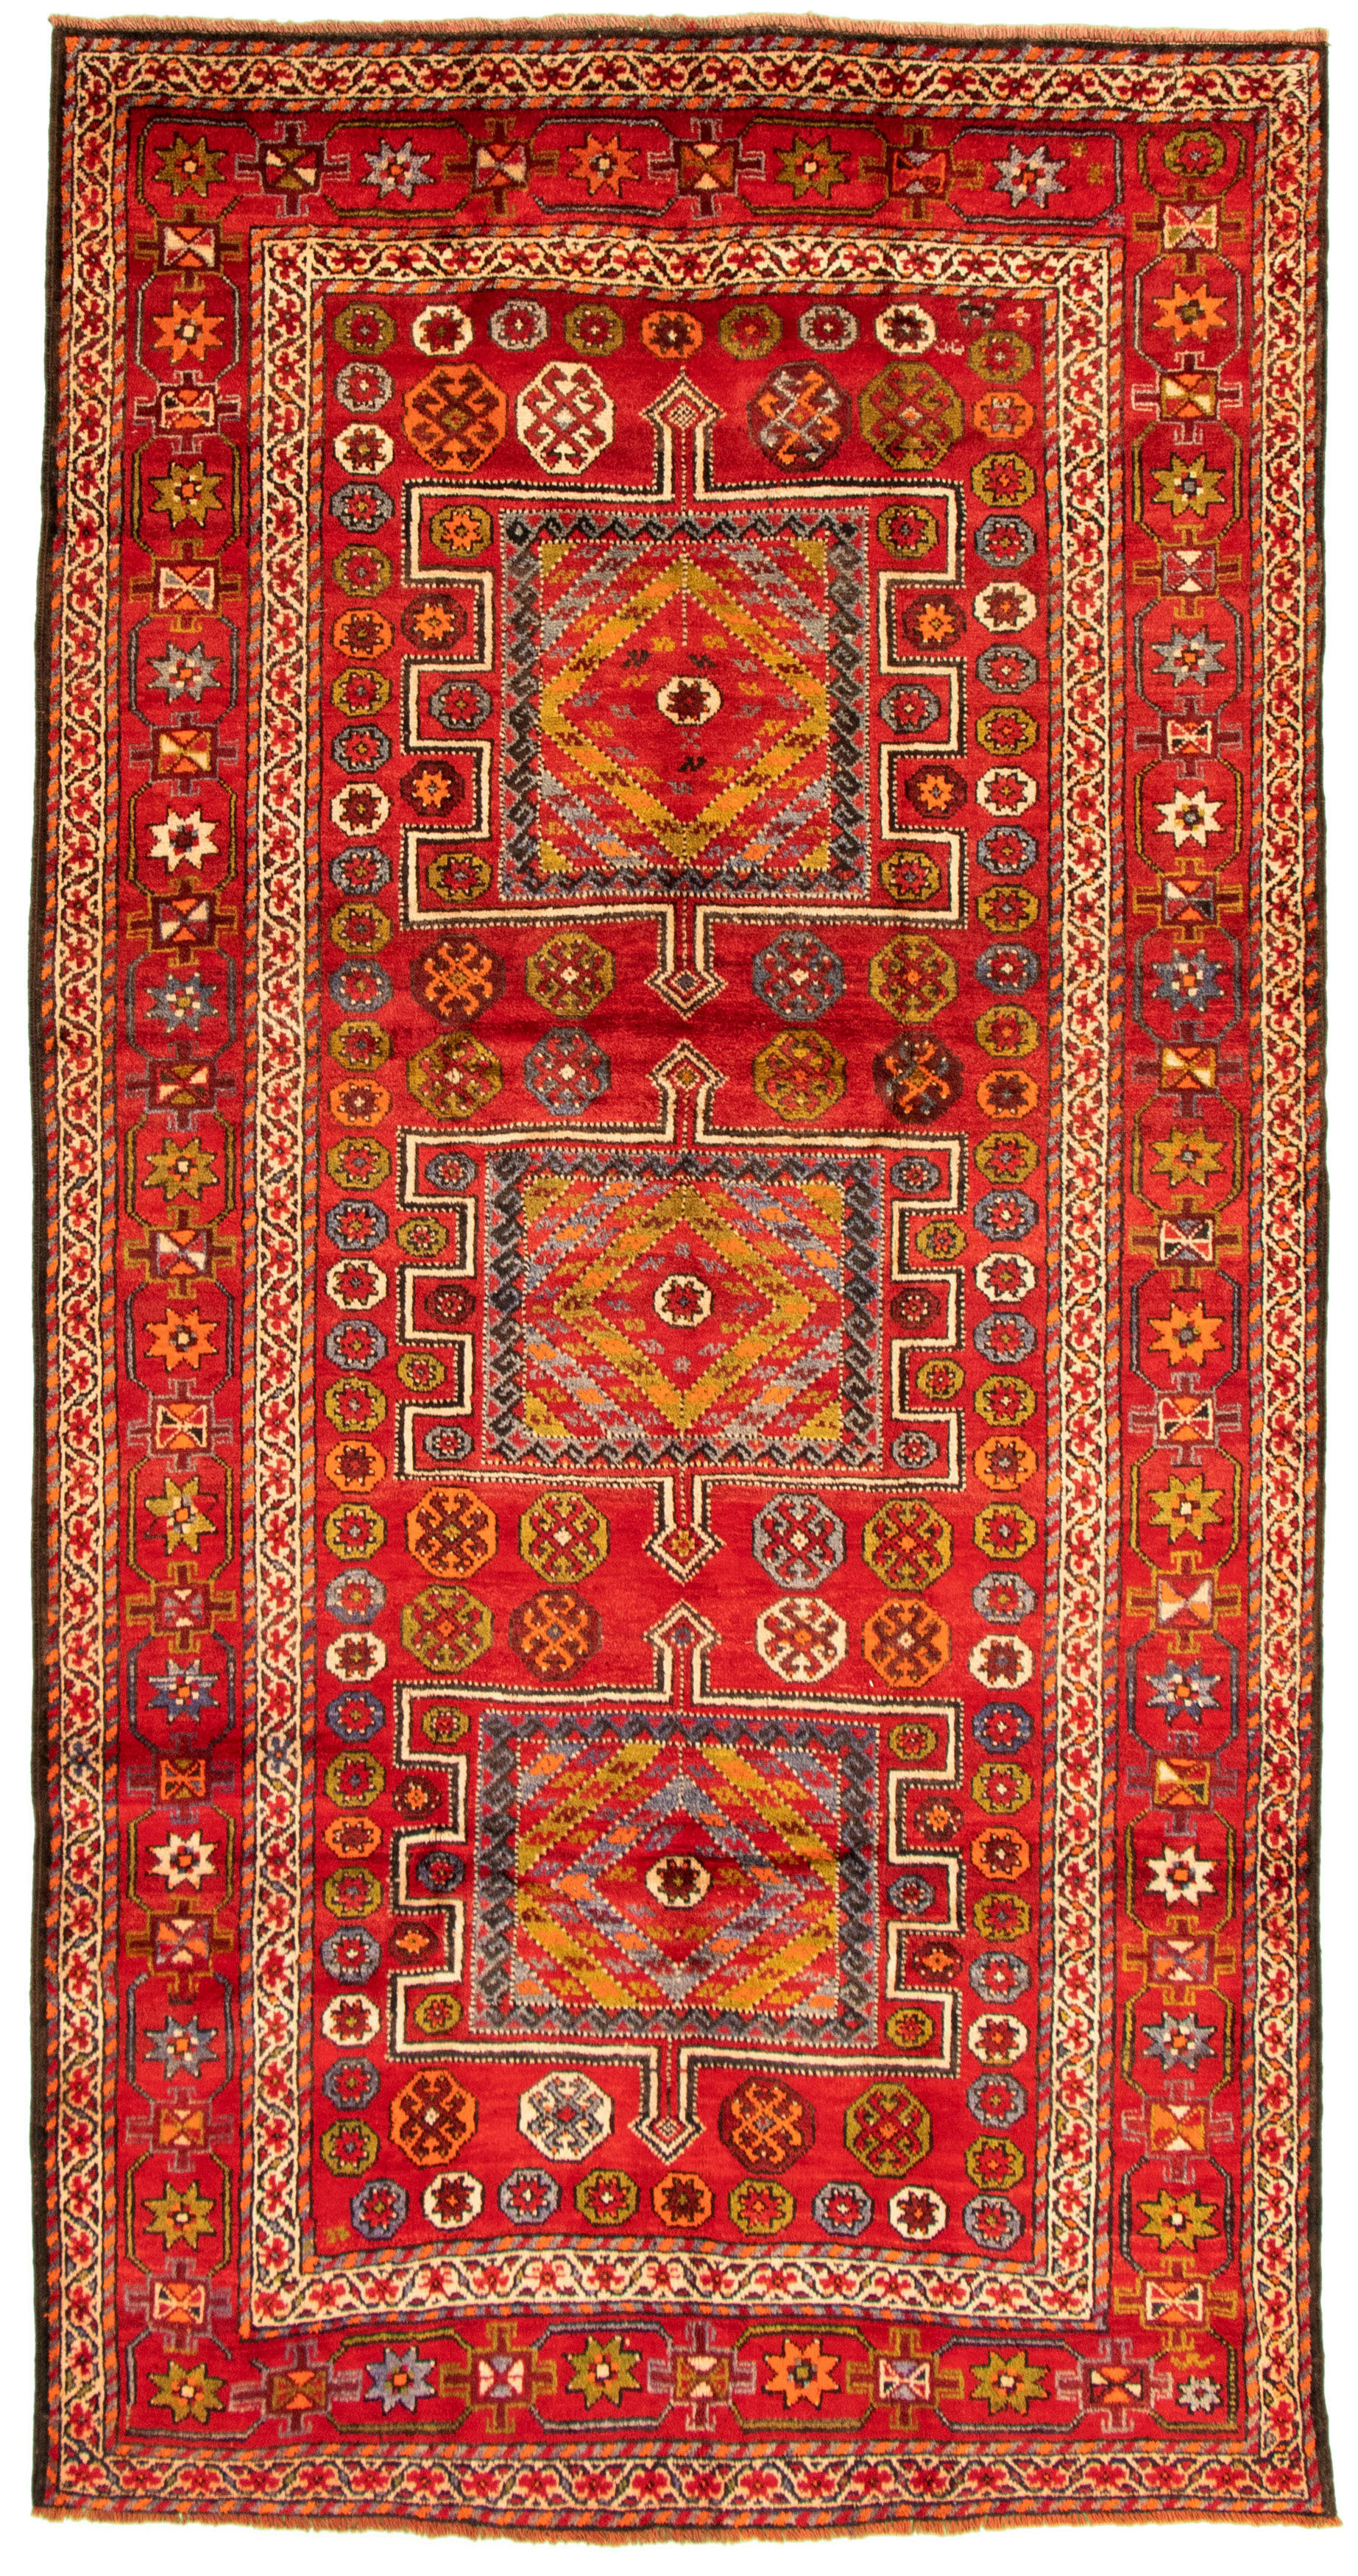 Hand-knotted Ottoman Vintage Red Wool Rug 5'4" x 10'4" Size: 5'4" x 10'4"  